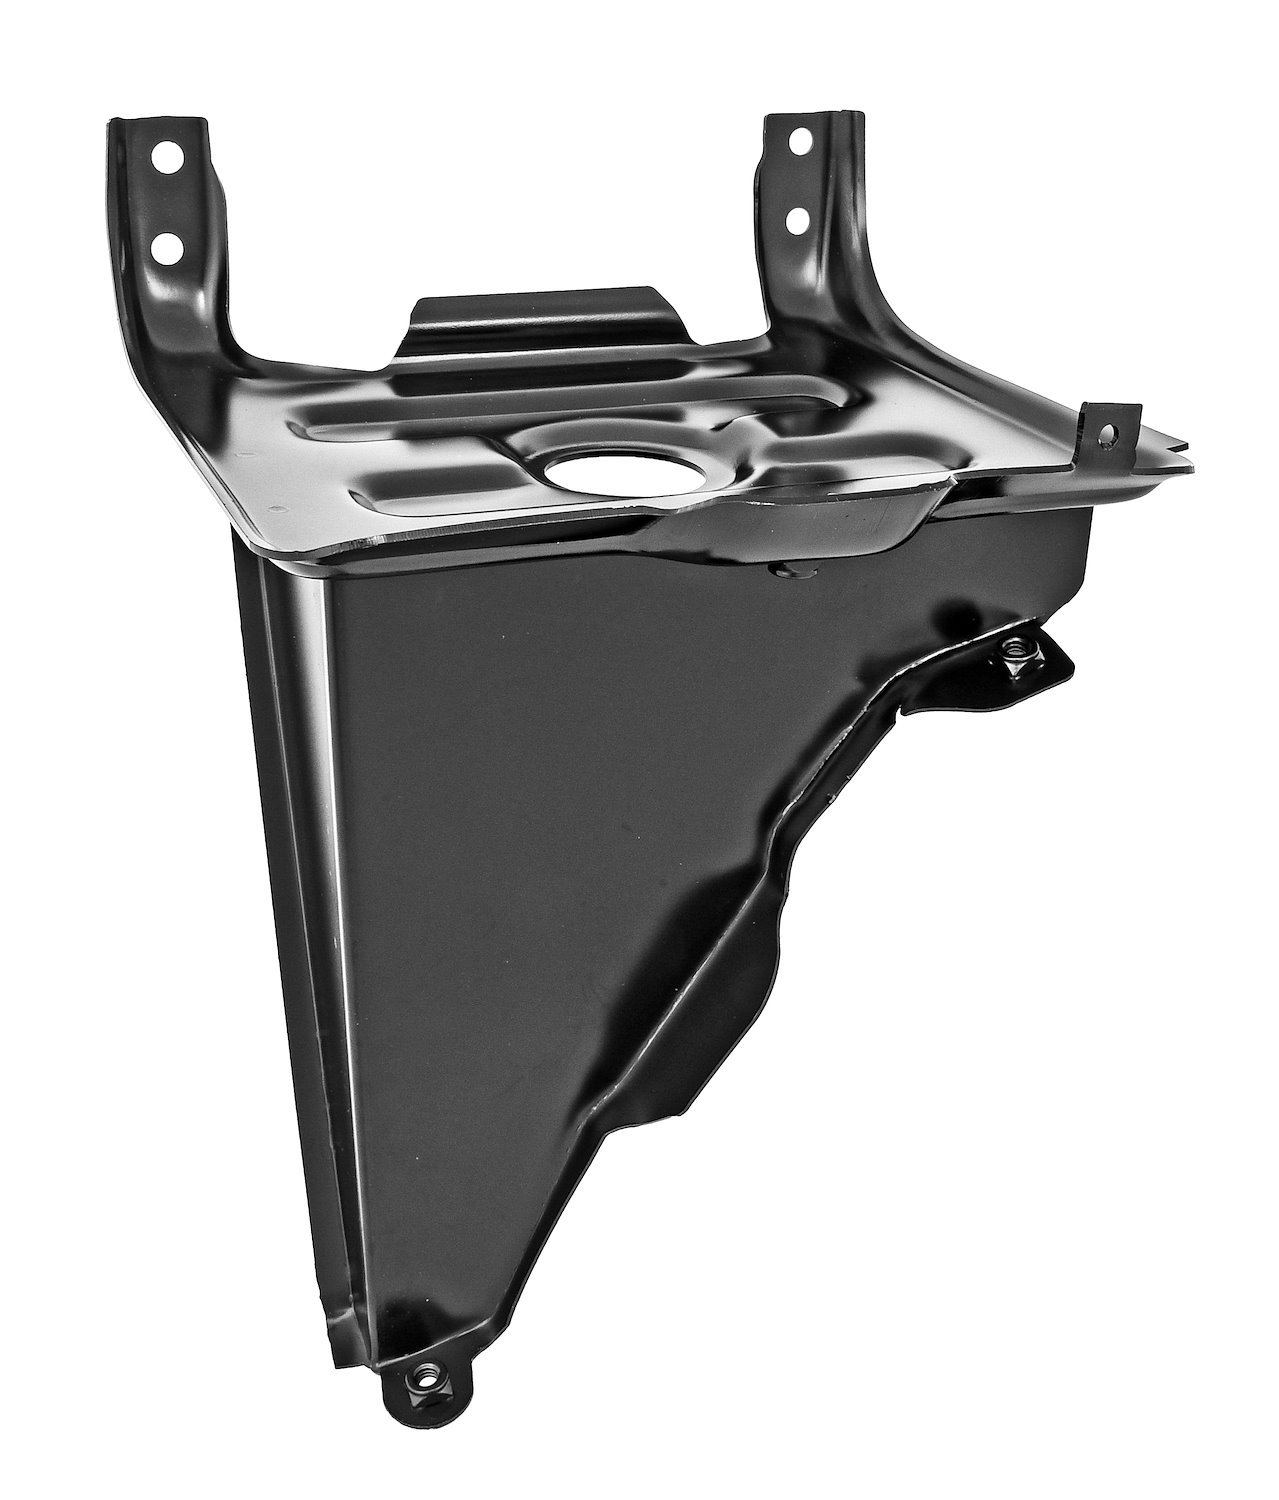 Battery Tray for 1981-1987 GM Pickup Trucks, 1981-1991 Chevy Blazer, GMC Jimmy [with Support]